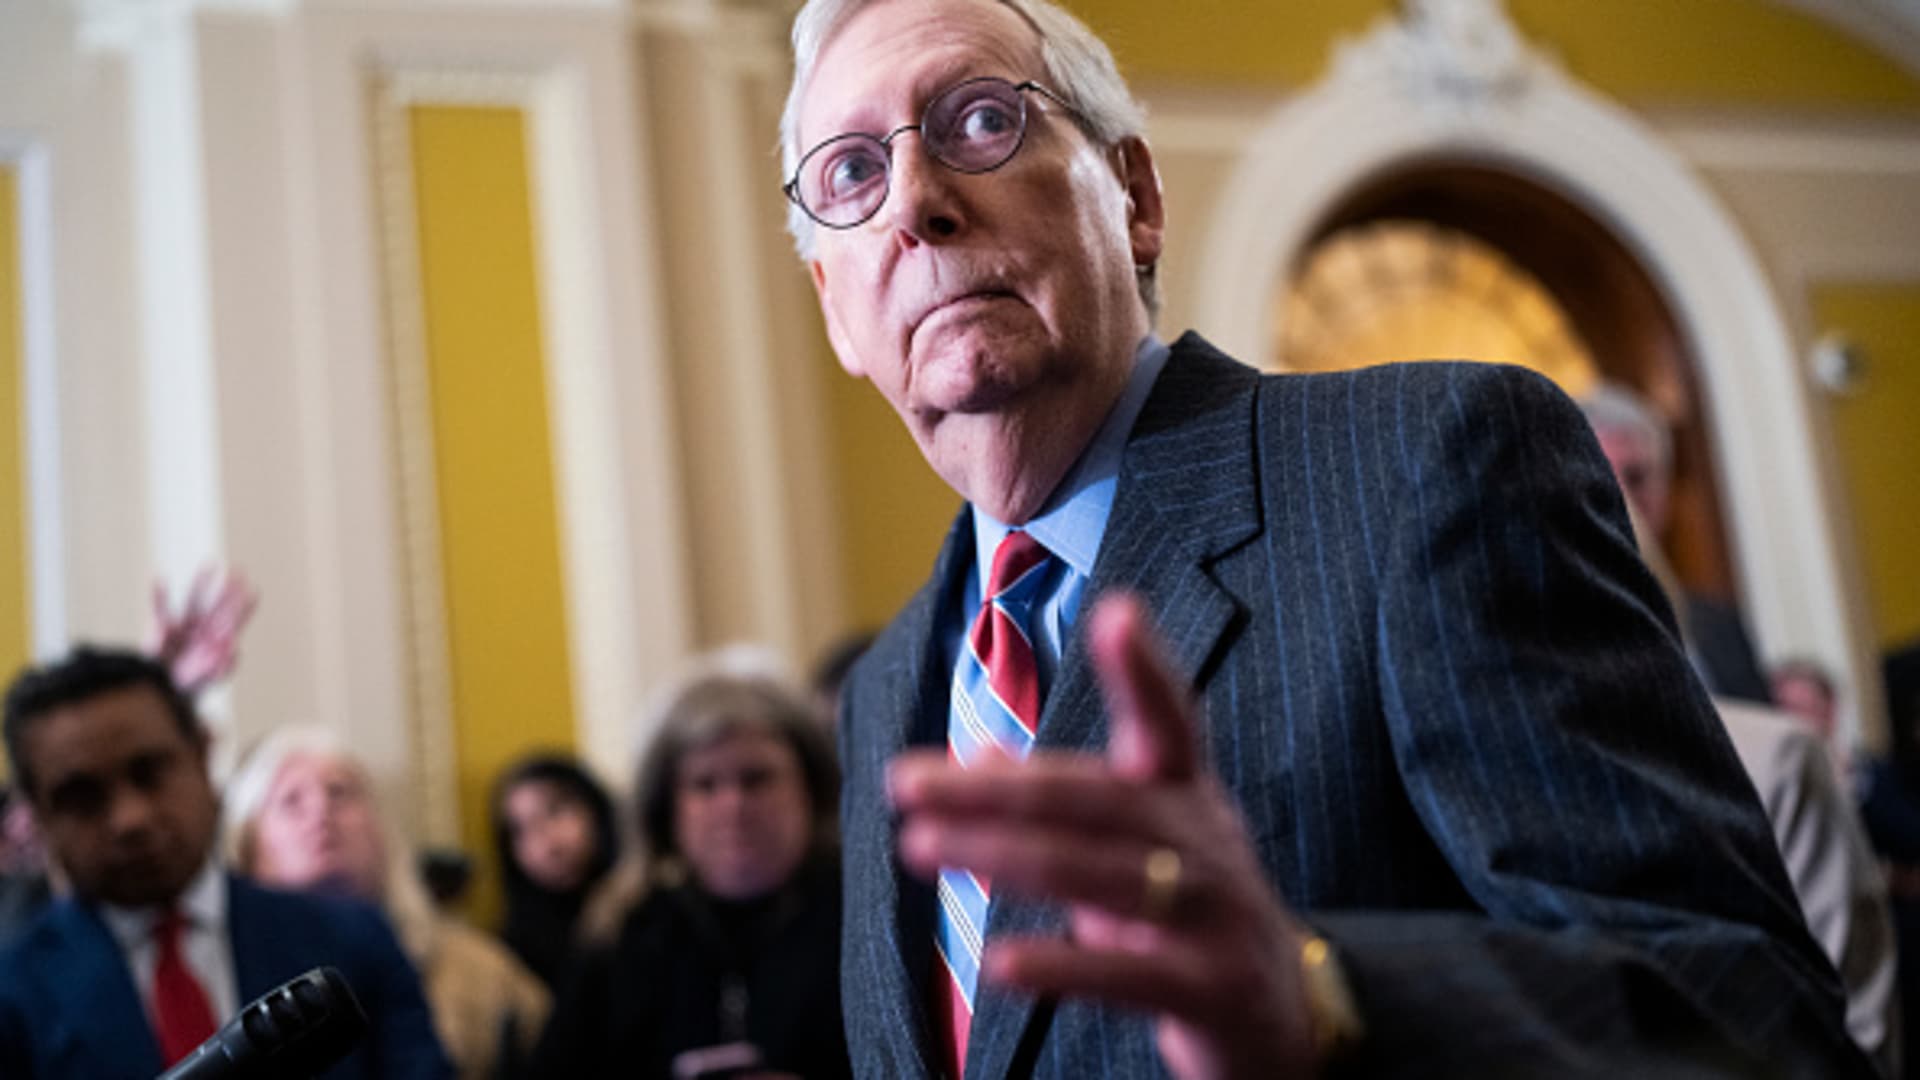 Mitch McConnell leaves rehab facility after therapy for concussion